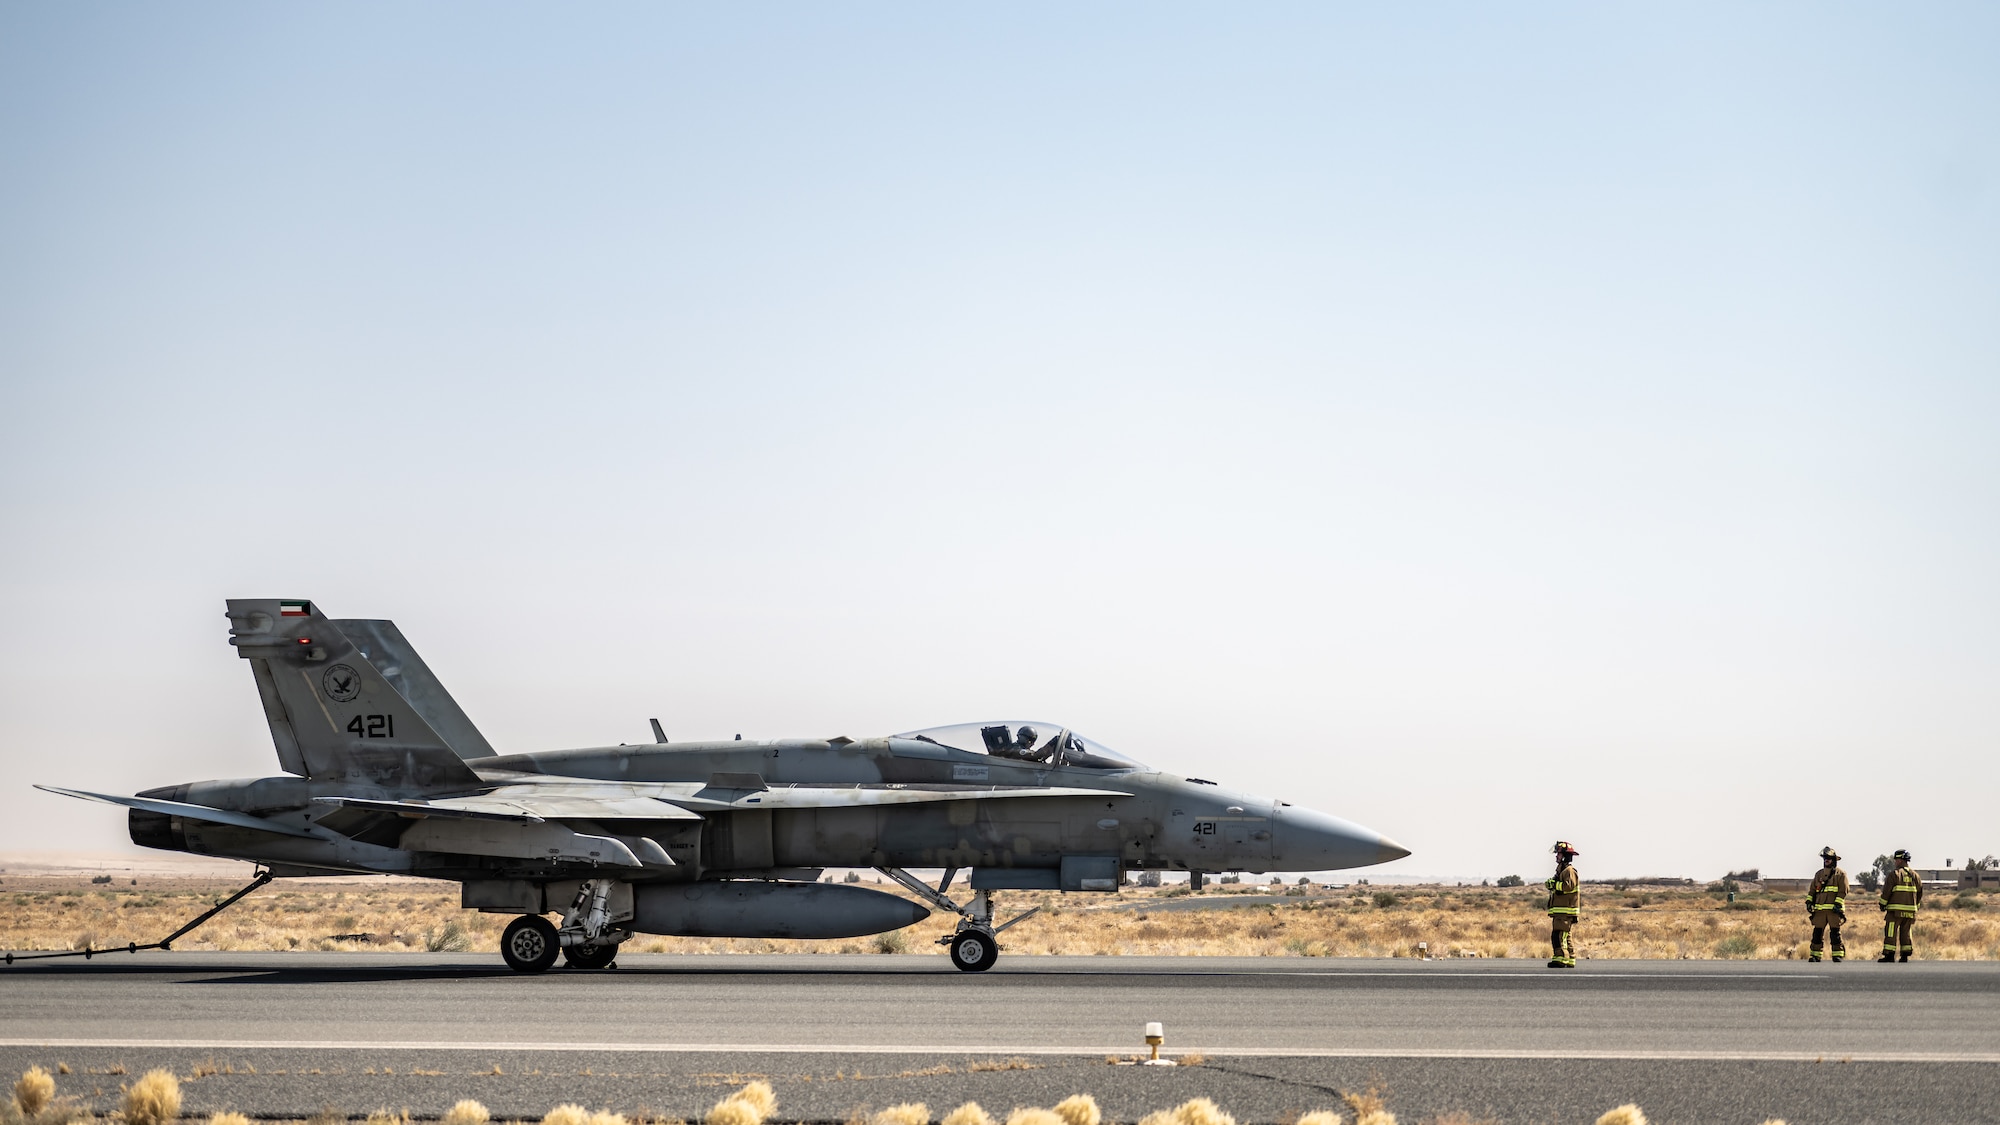 U.S. Air Force fire protection Airmen assigned to the 386th Expeditionary Civil Engineer Squadron prepare to disconnect a Kuwait Air Force F/A-18 Super Hornet from a Mobile Aircraft Arresting System (MAAS) at Ali Al Salem Air Base, Kuwait, July 10, 2023. This certification event was beneficial to the U.S. and Kuwait as both parties received more experience using the MAAS, which has been certified to continue providing enhanced stopping power to inbound aircraft for a variety of scenarios. (U.S. Air Force photo by Staff Sgt. Kevin Long)